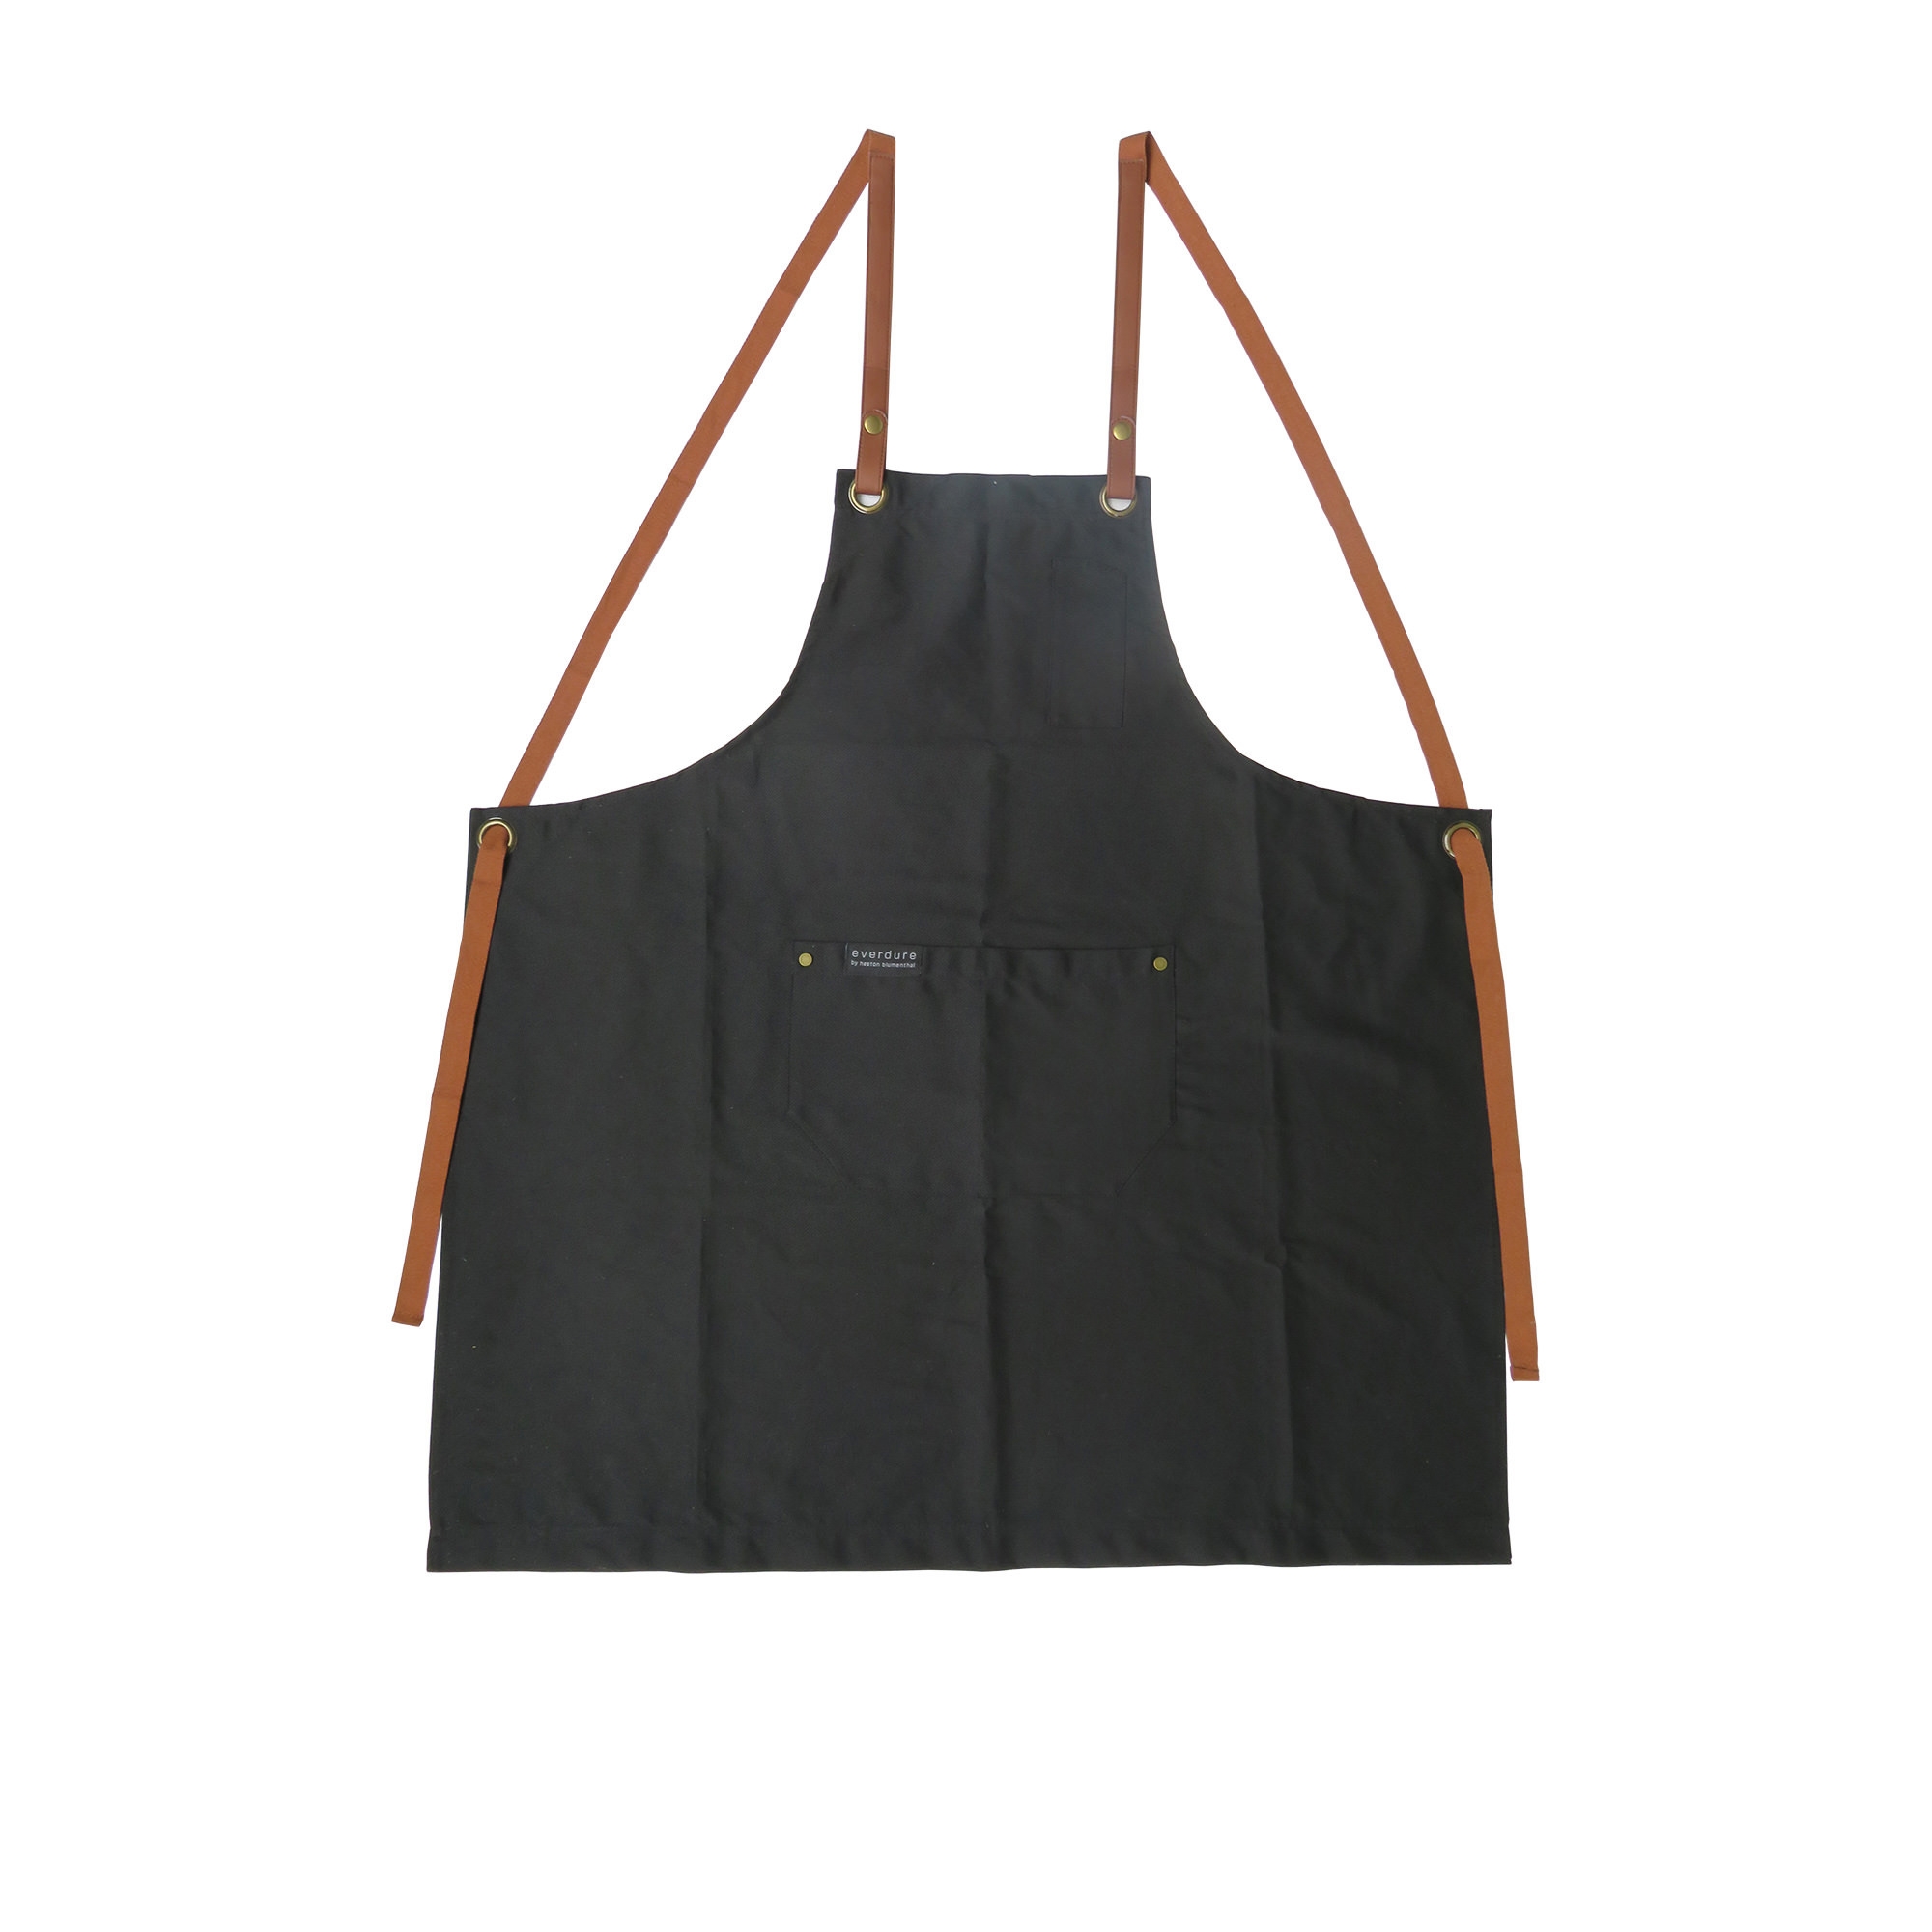 Everdure by Heston Blumenthal Premium Apron with Leather Detail Image 1